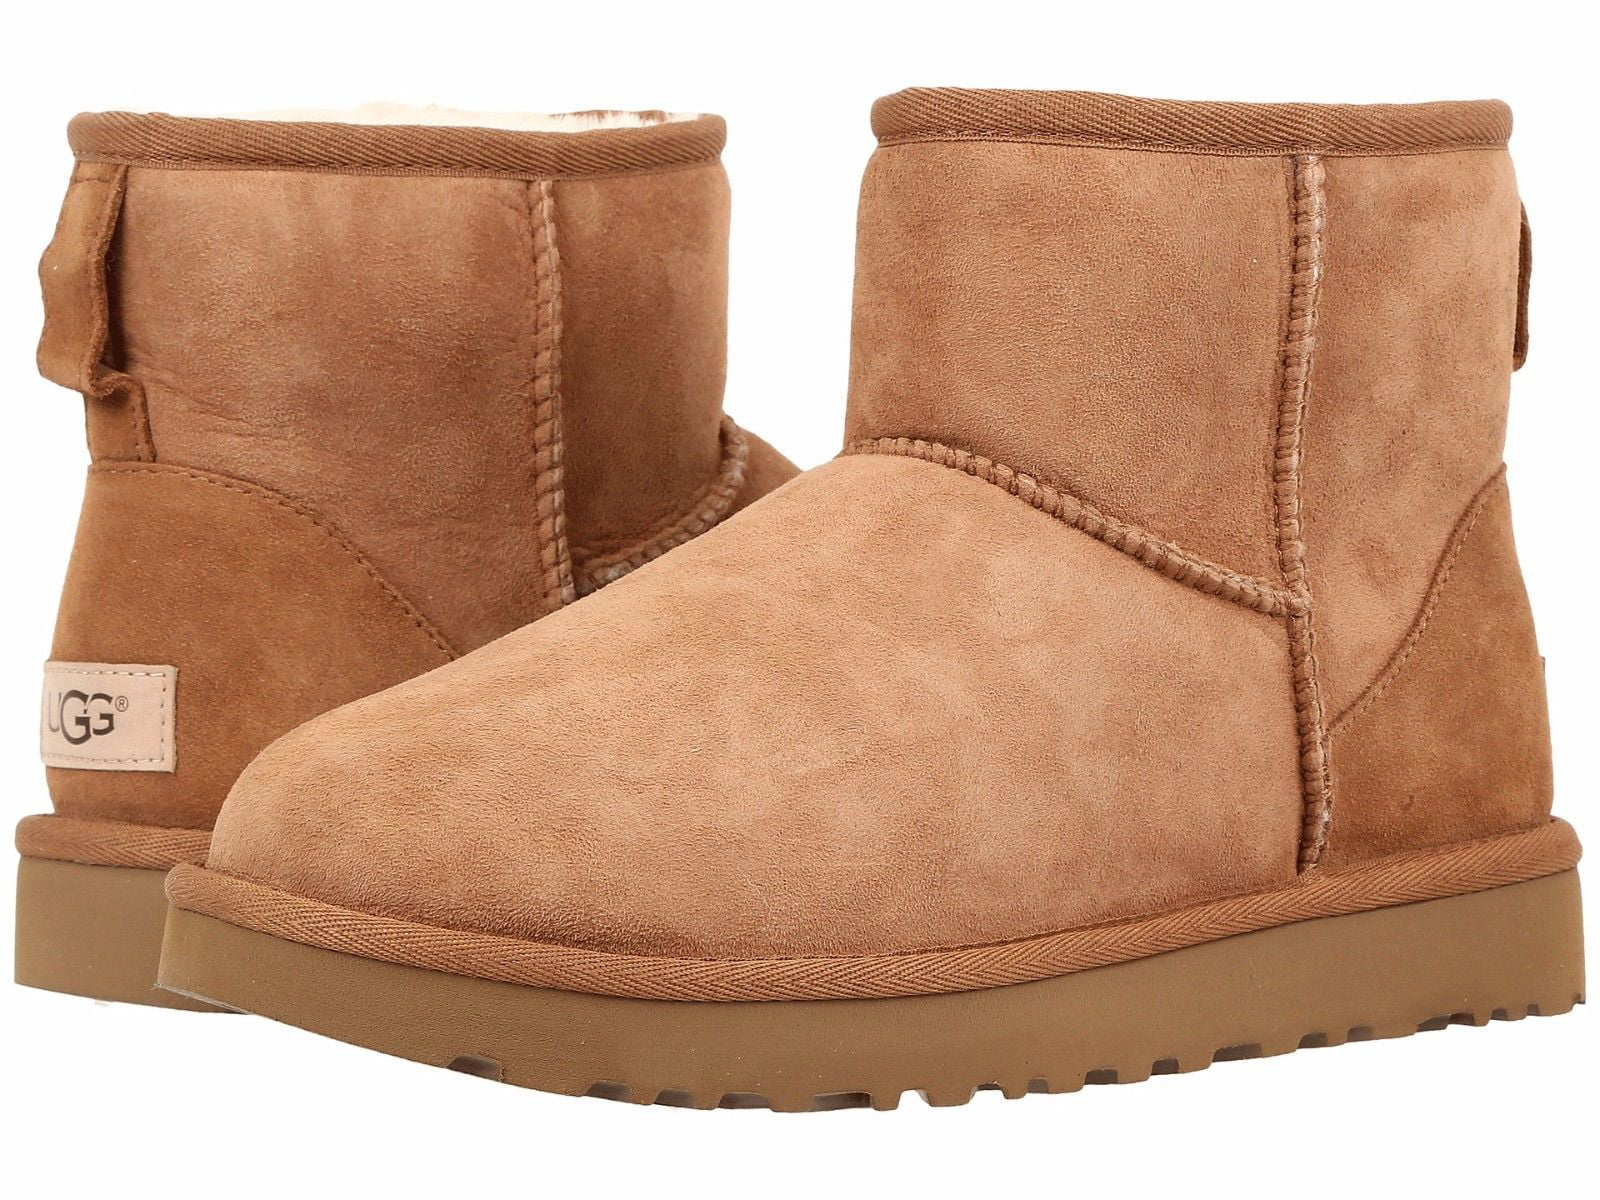 Are Ugg Shoes True To Size